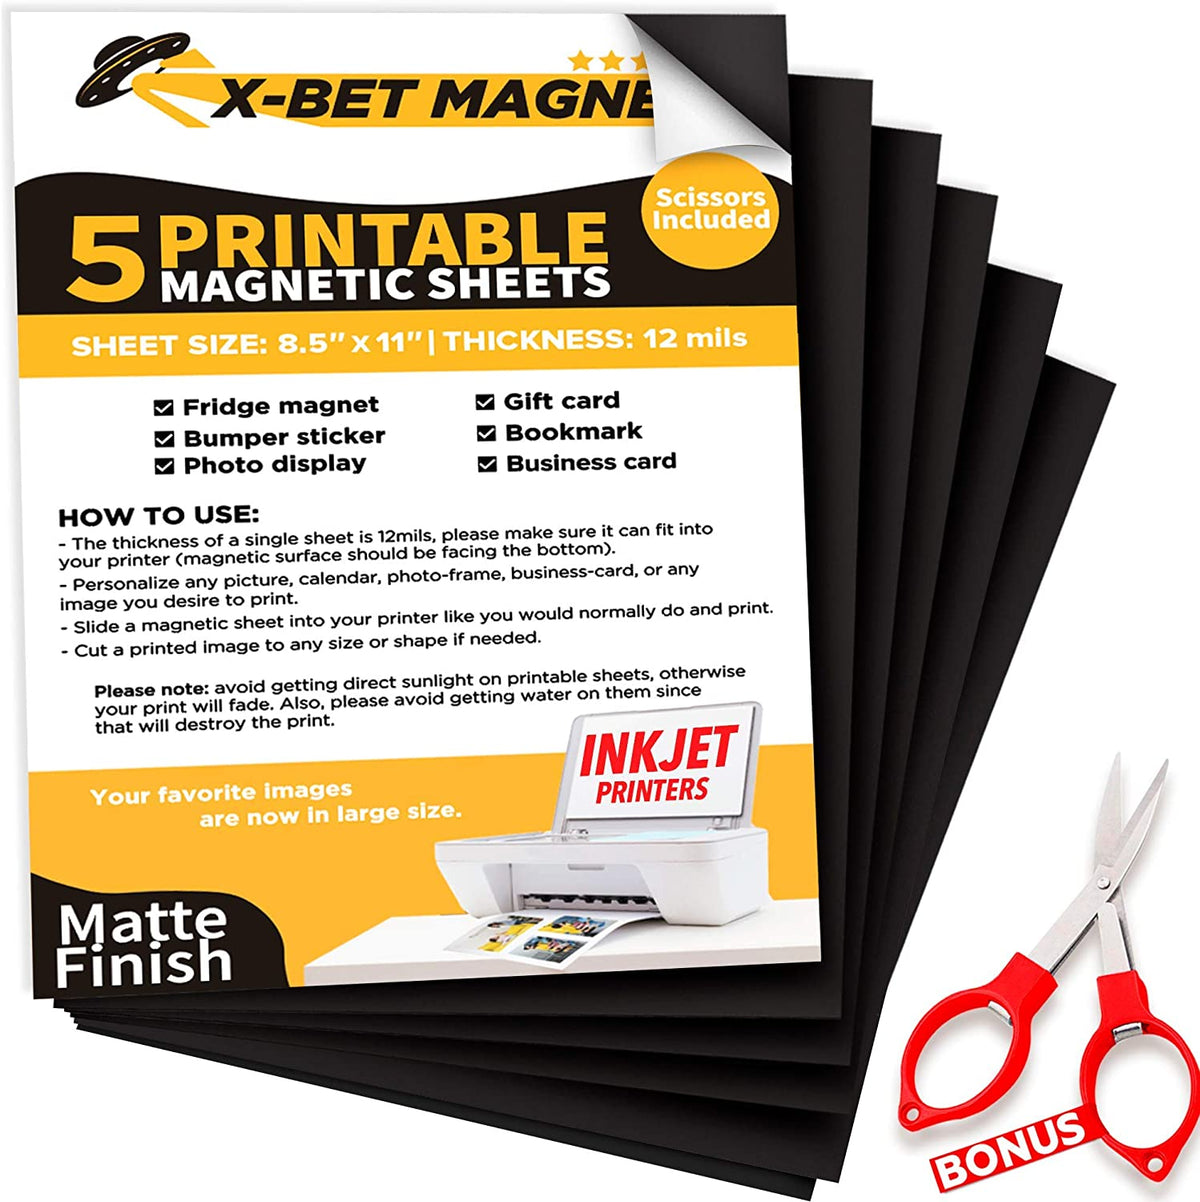 Printer Hack with Printable Magnetic Sheets  Printable magnetic sheets,  Printer hacks, Magnetic sheets